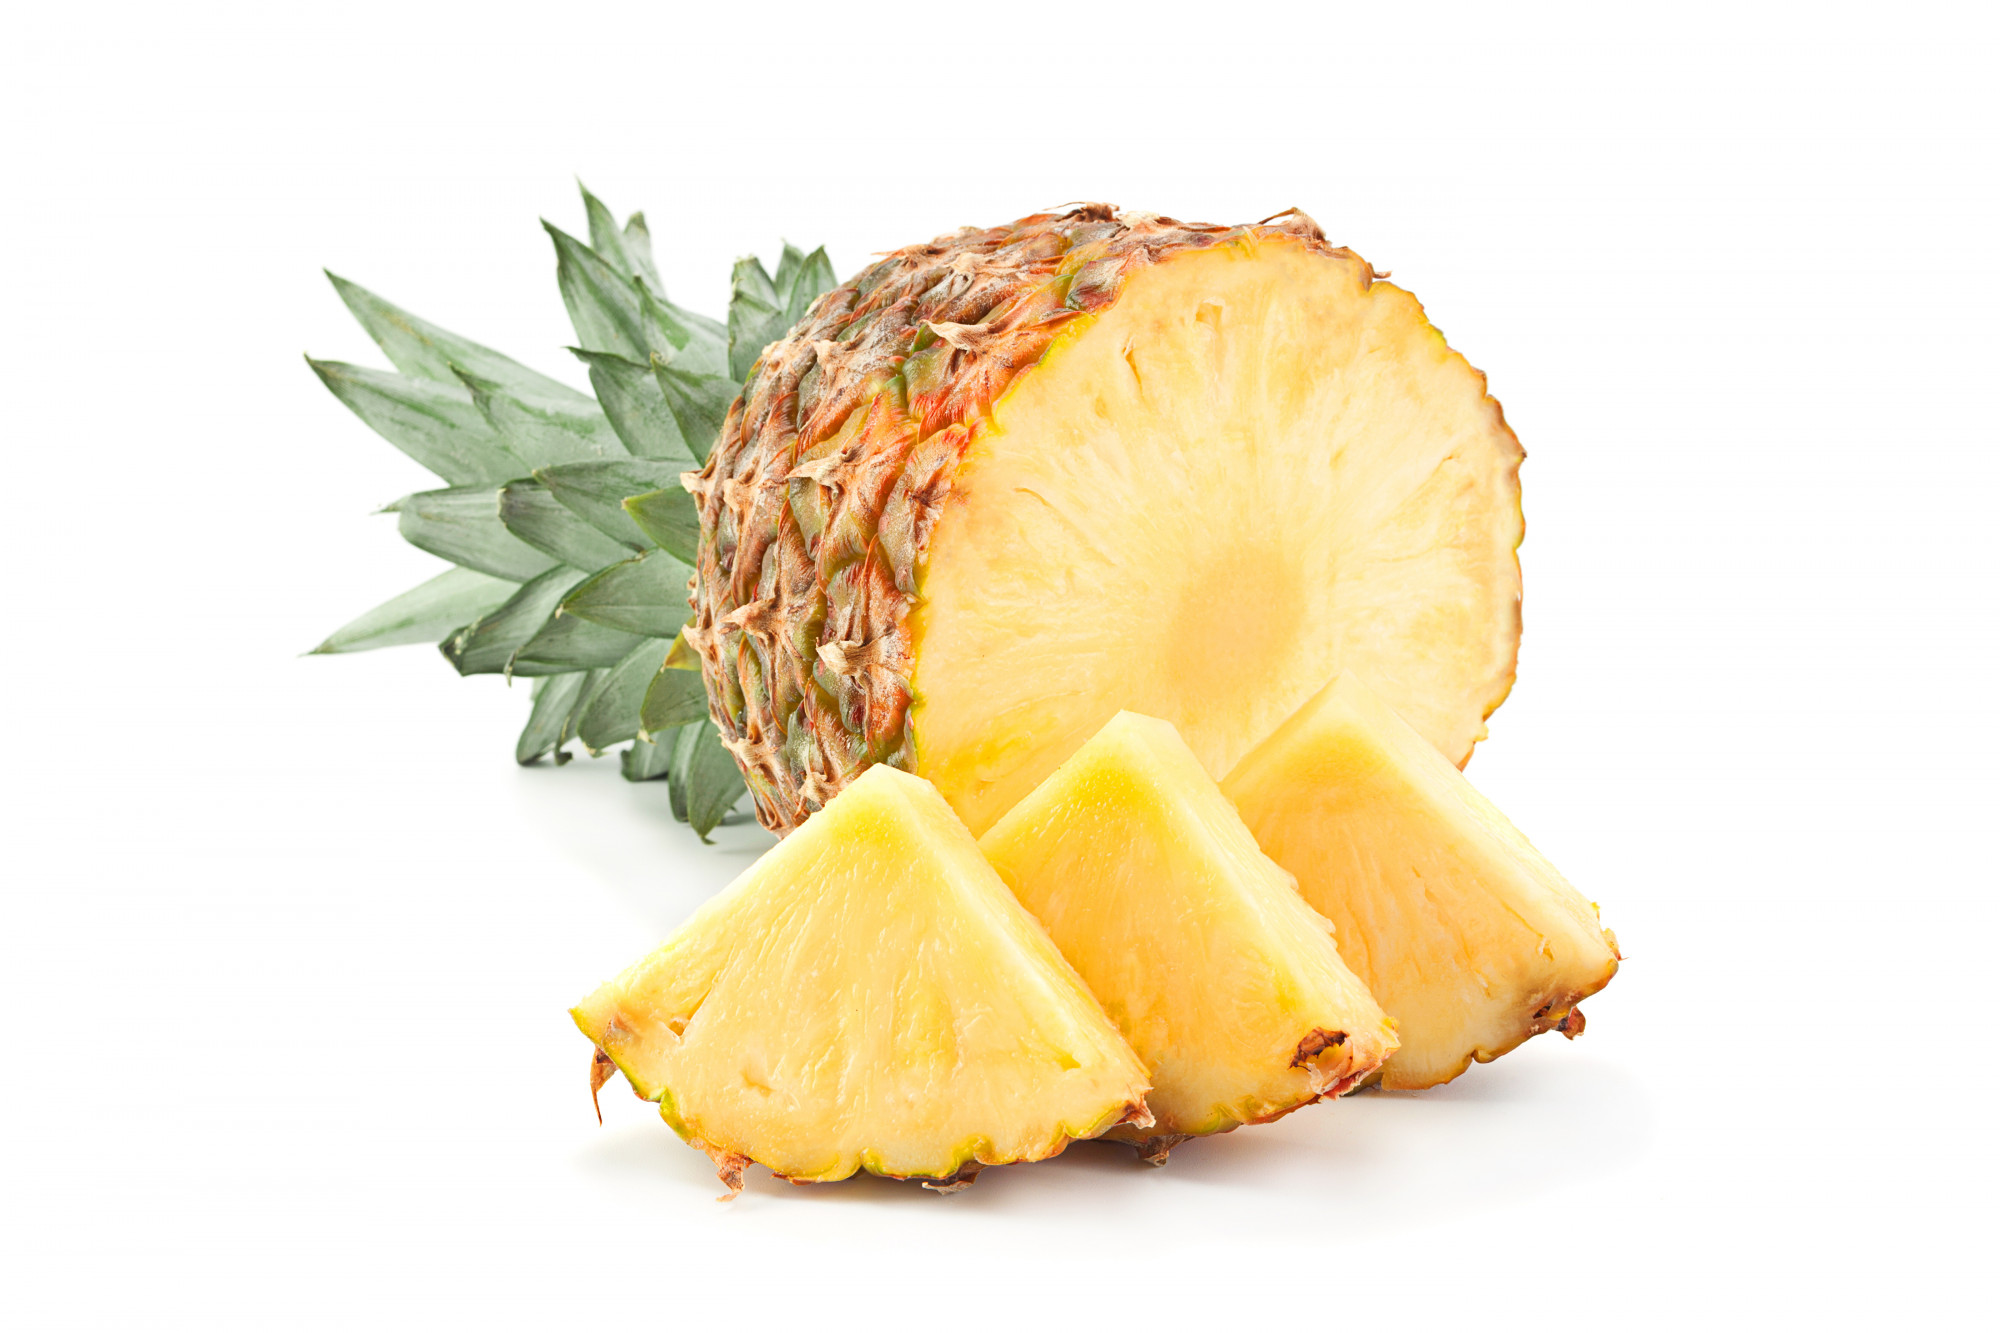 Ananas Extra Sweet (bateau) - Fruits exotiques réf.LPDL-000007